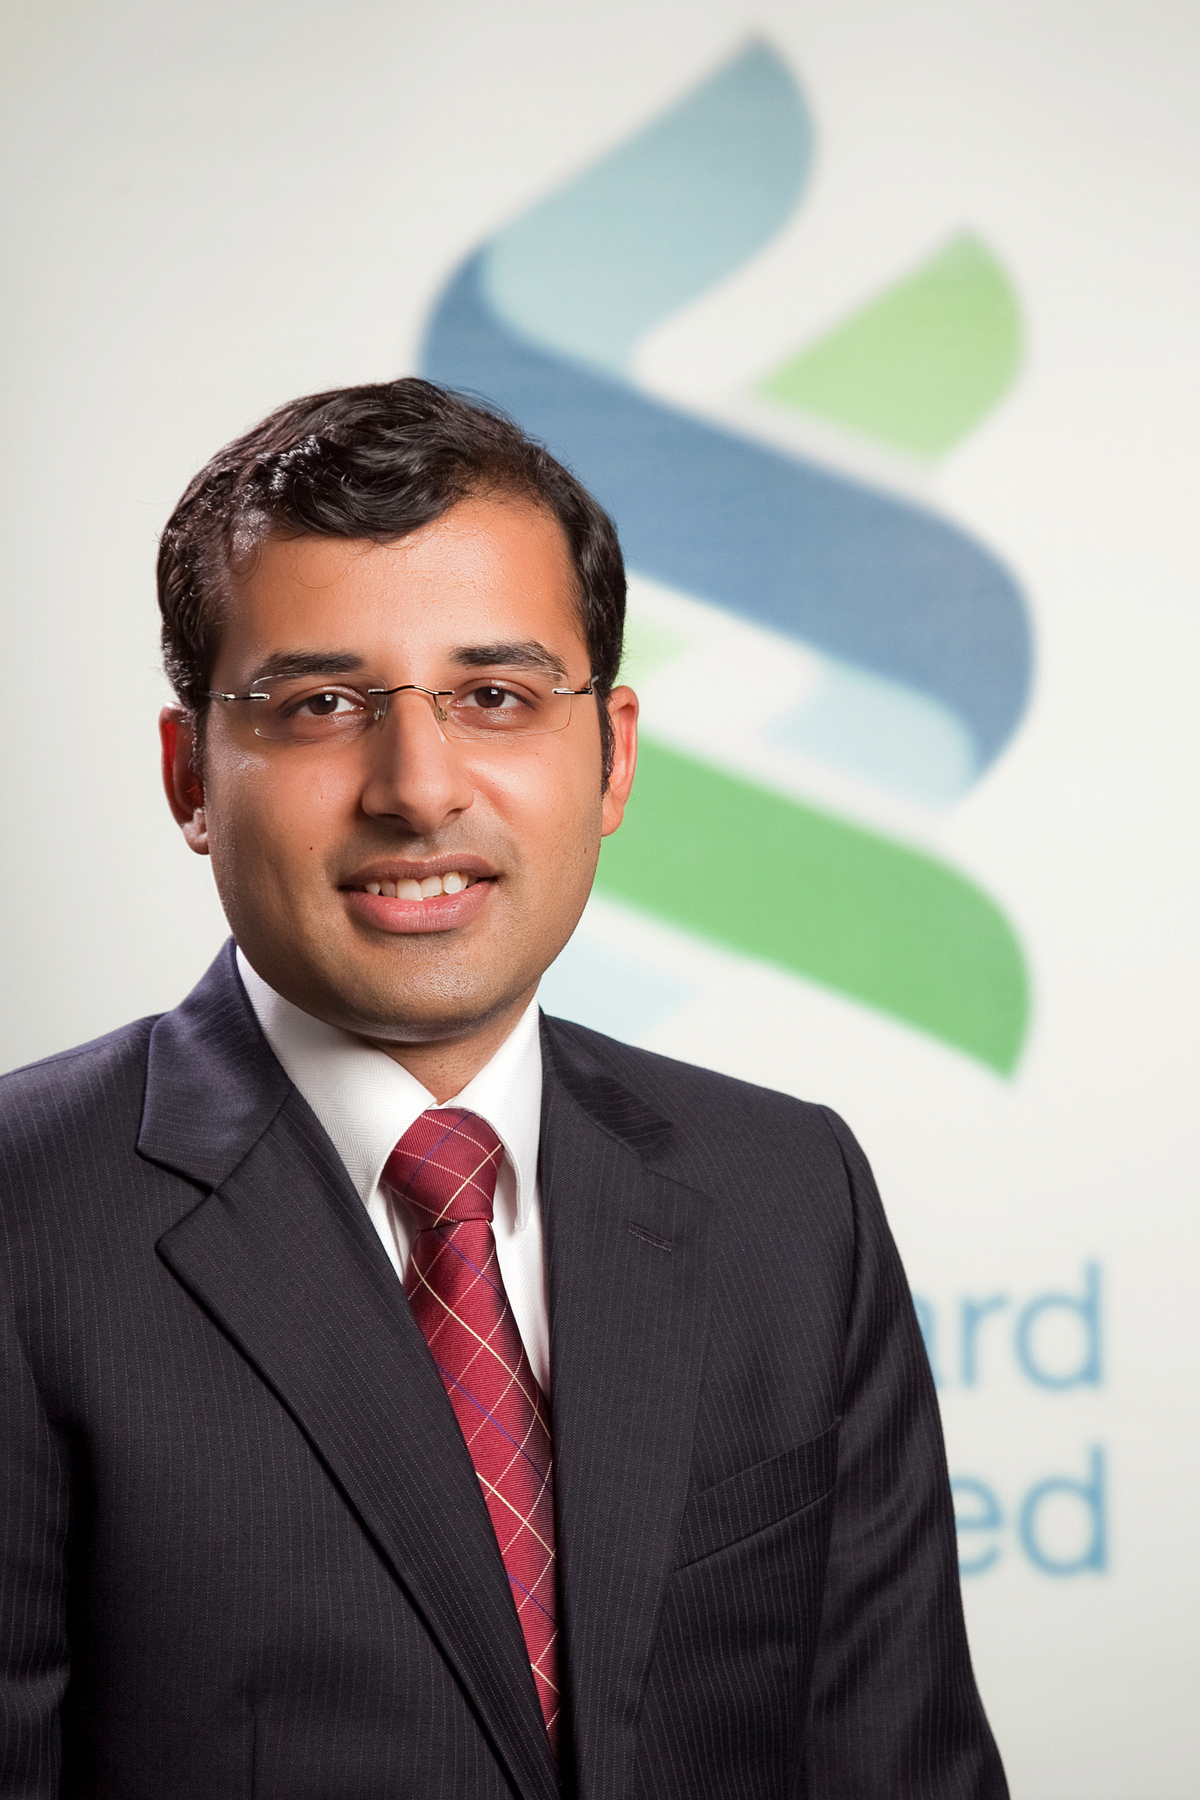 Manpreet Gill, CIO for Africa, Middle East and Europe at Standard Chartered Bank's Wealth Management unit (Standard Chartered Bank)